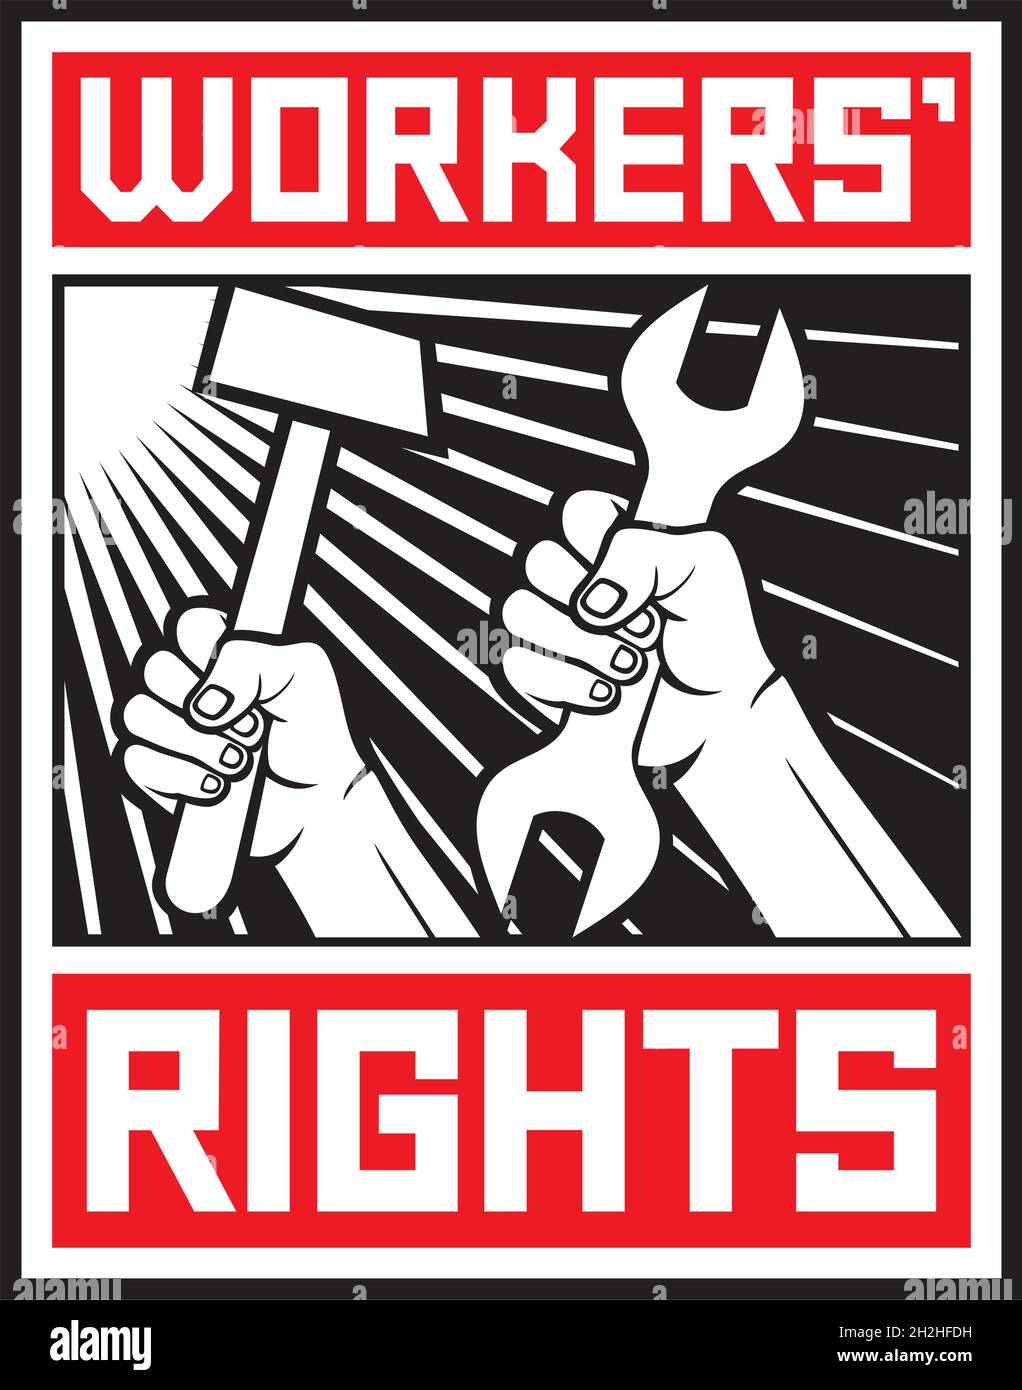 Worker`s rights poster vector illustration Stock Vector